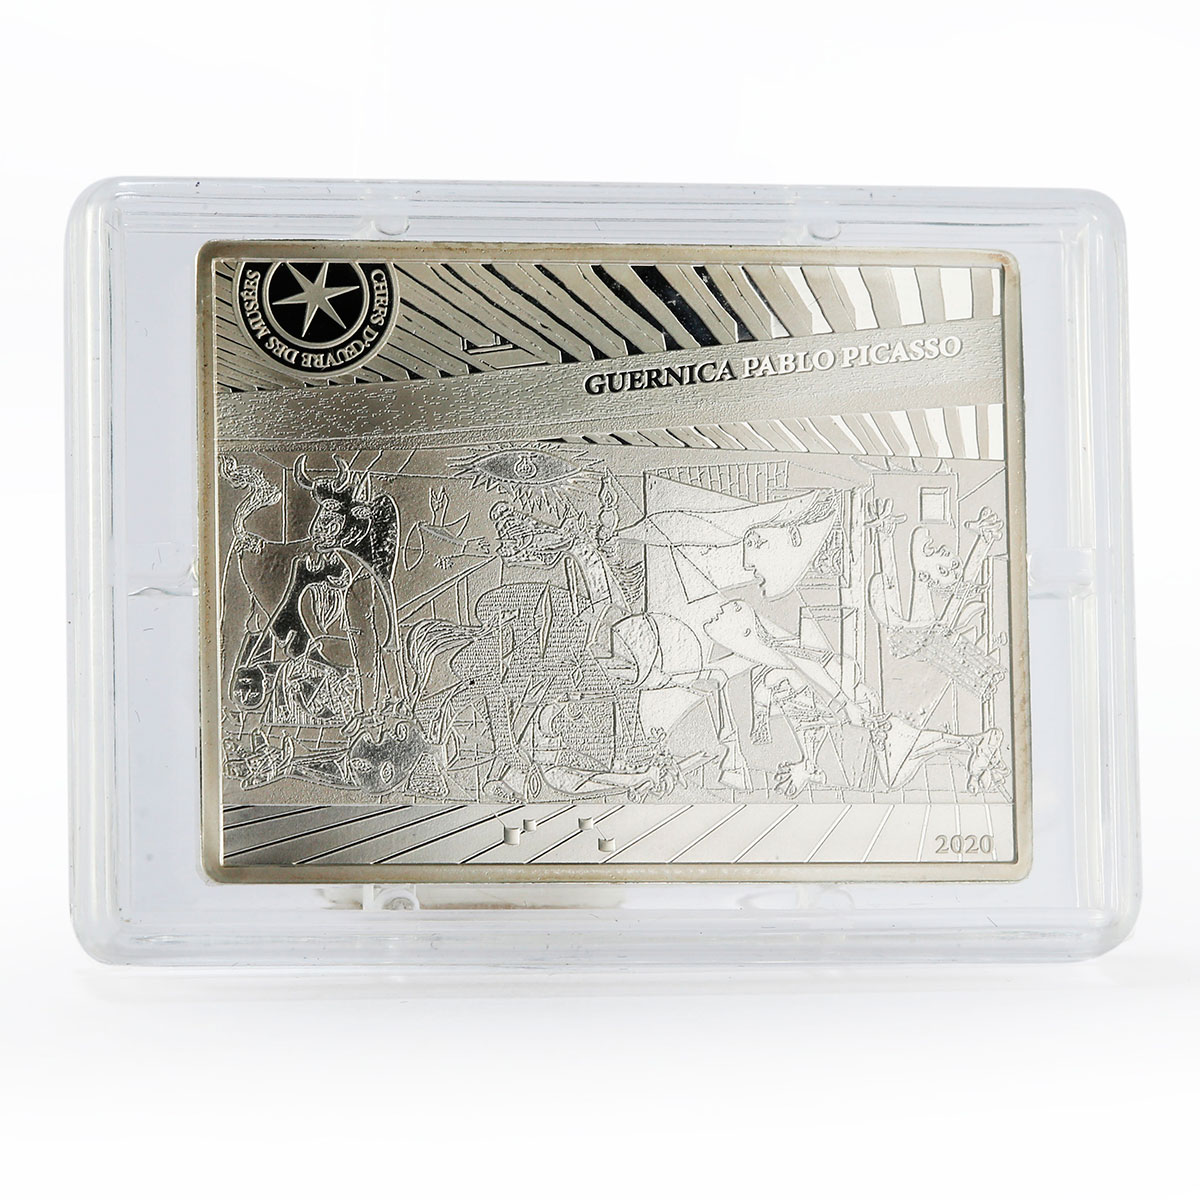 France 10 euro World Art Masterpieces series Picasso's Guernica silver coin 2020